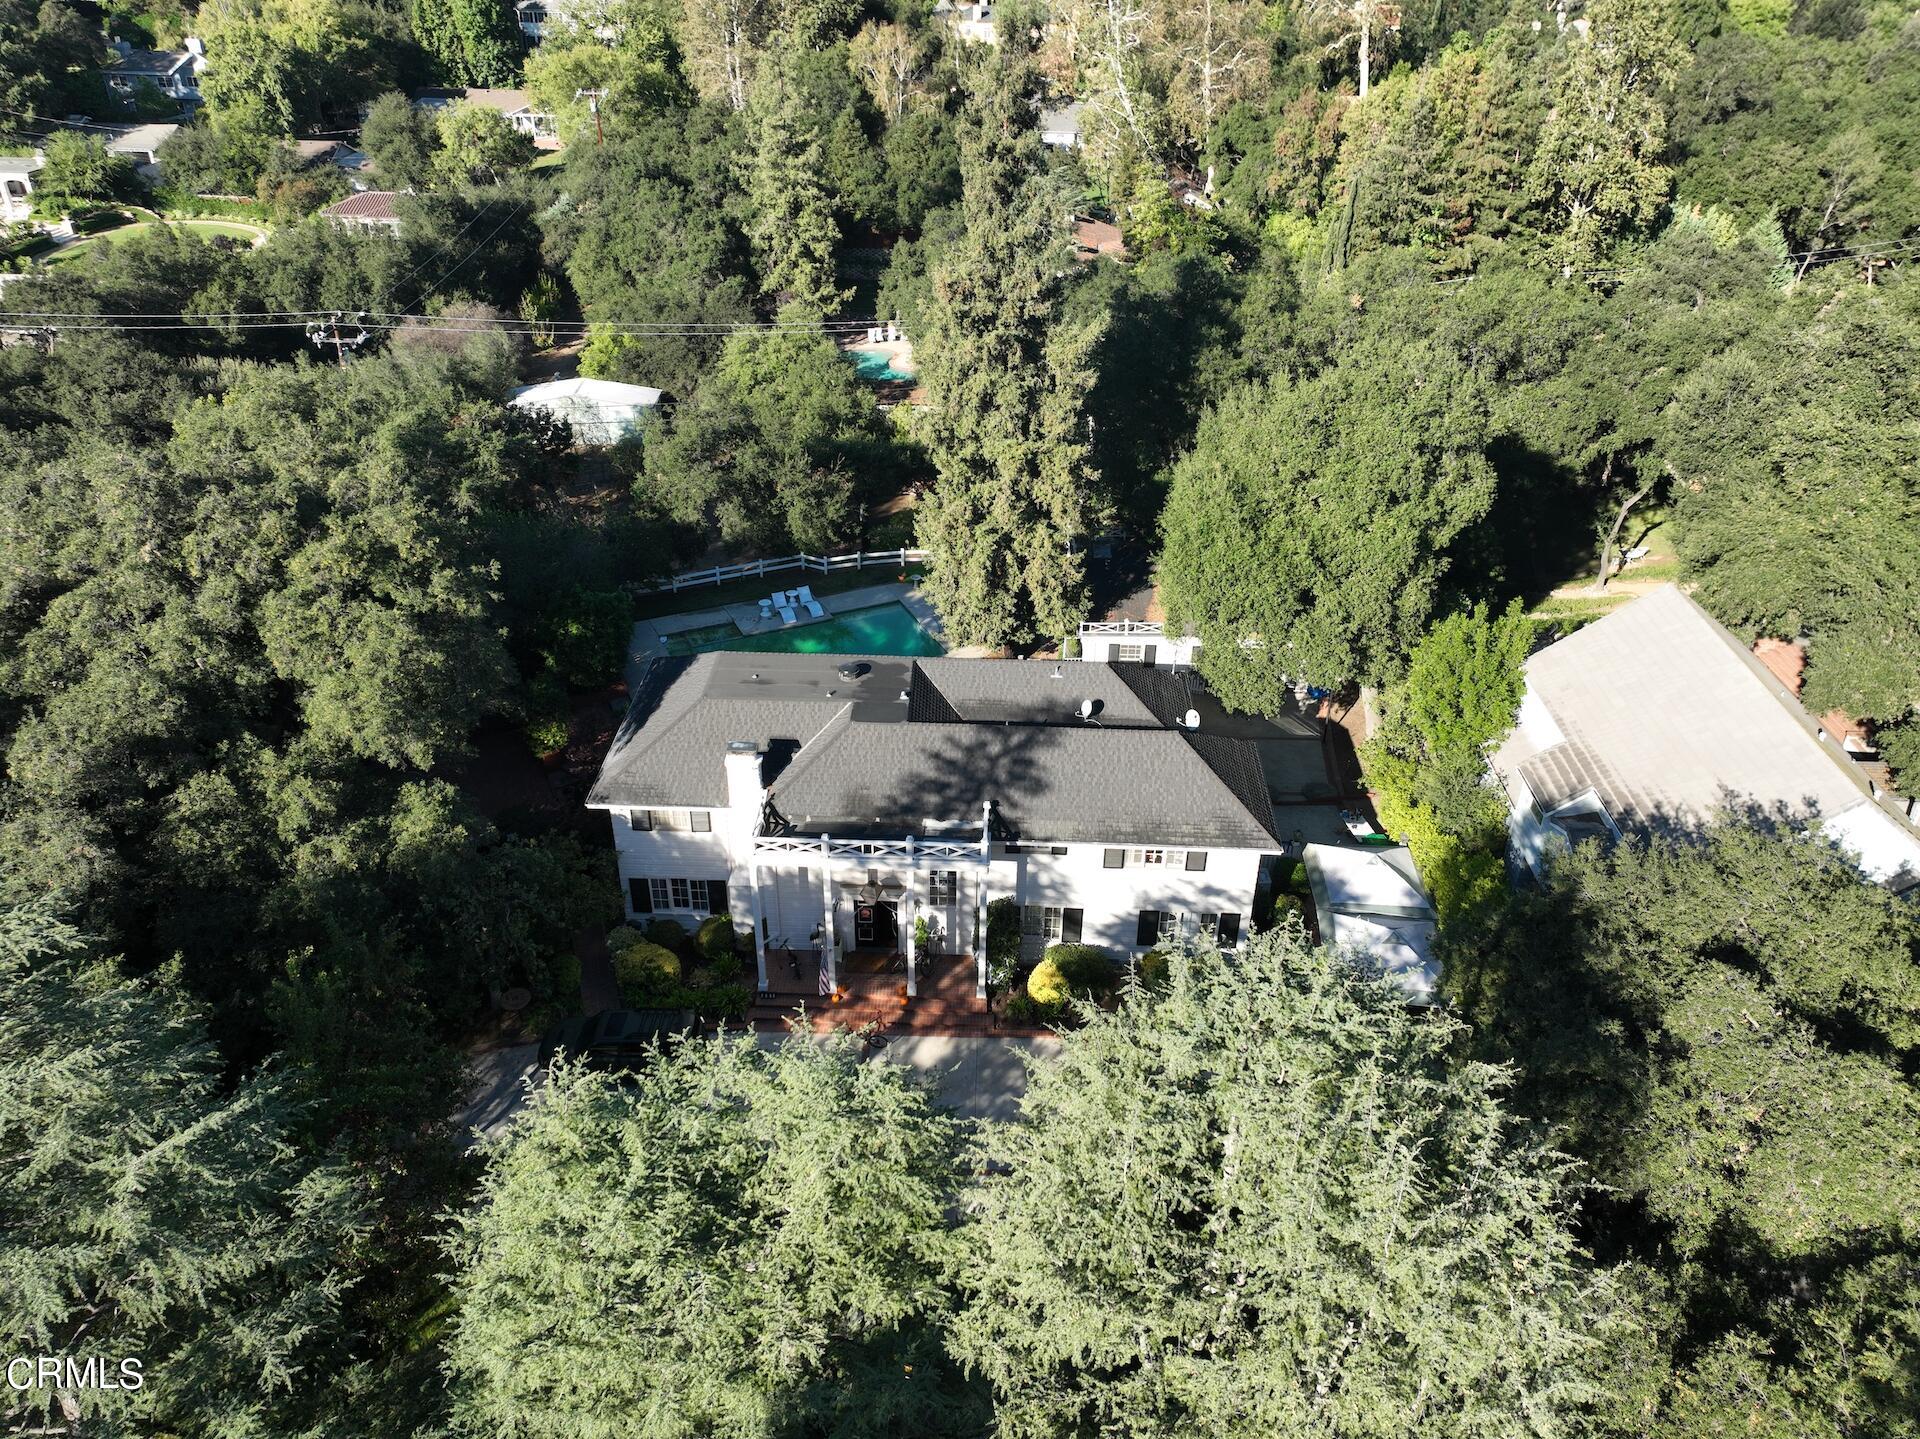 an aerial view of a house with a yard and large trees